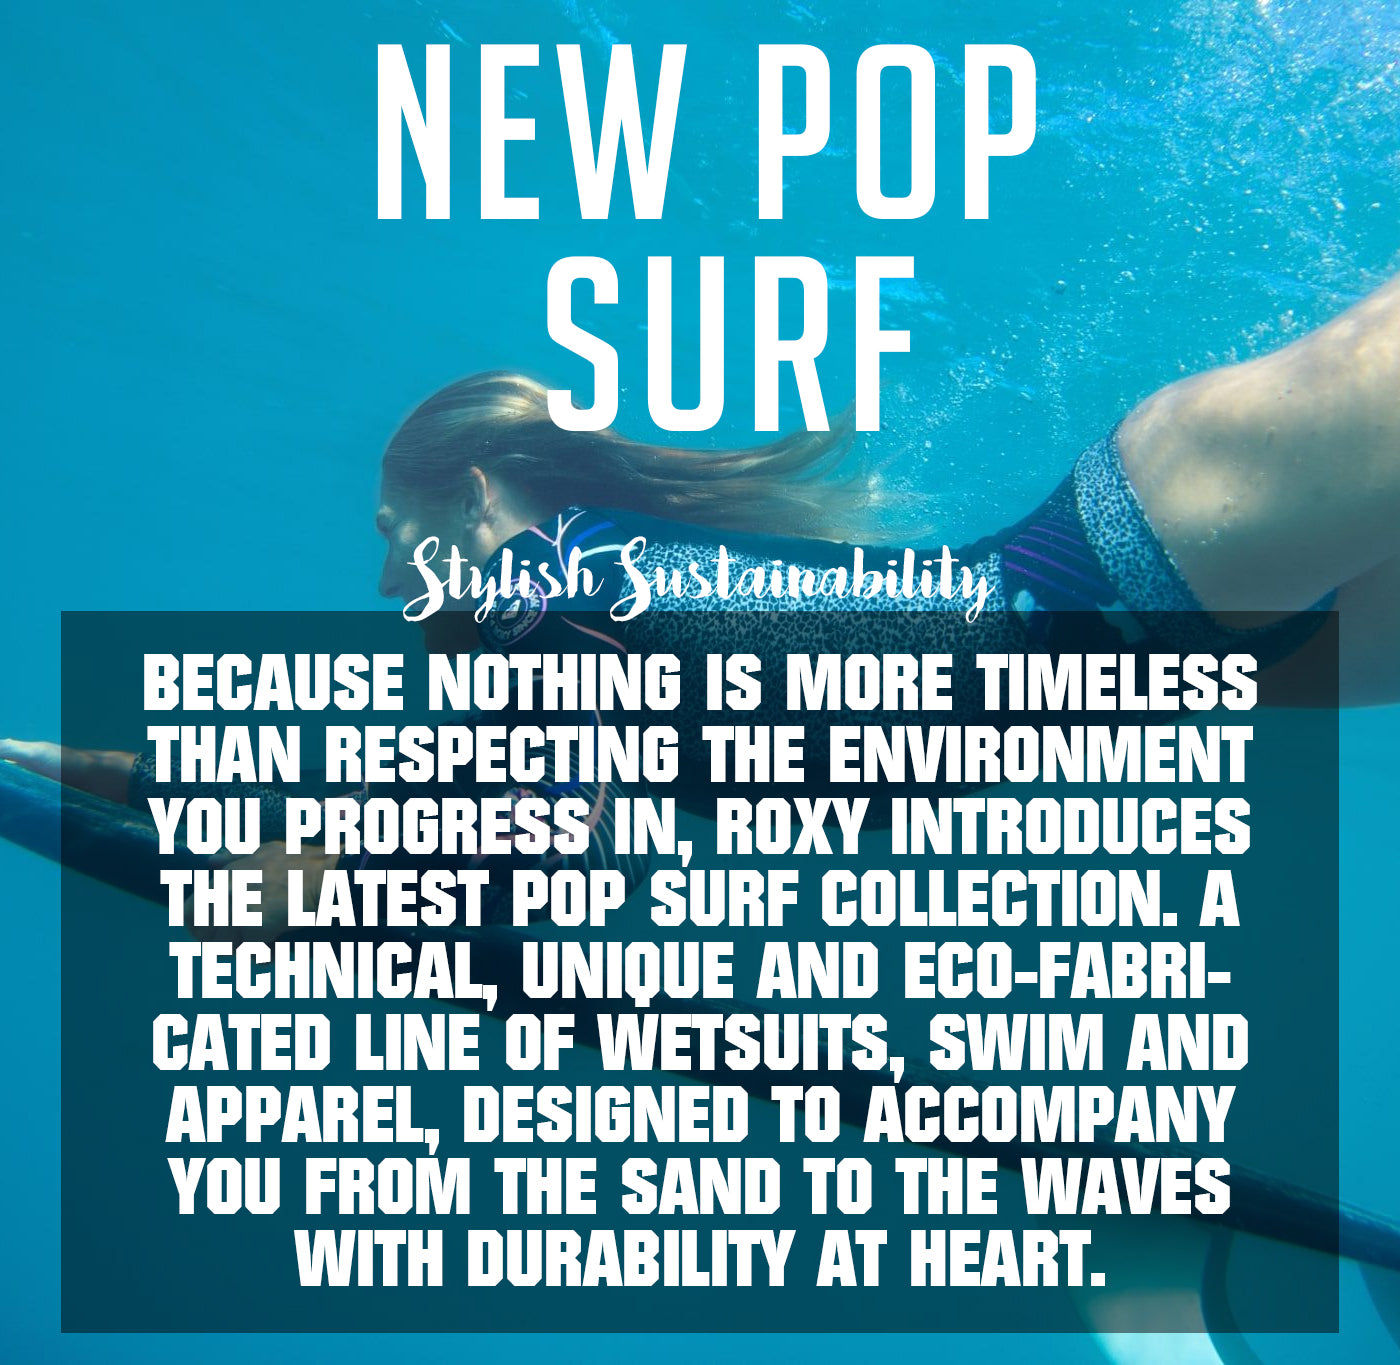 Roxy Women's Collection 2021 | The All New Pop Surf Swimwear